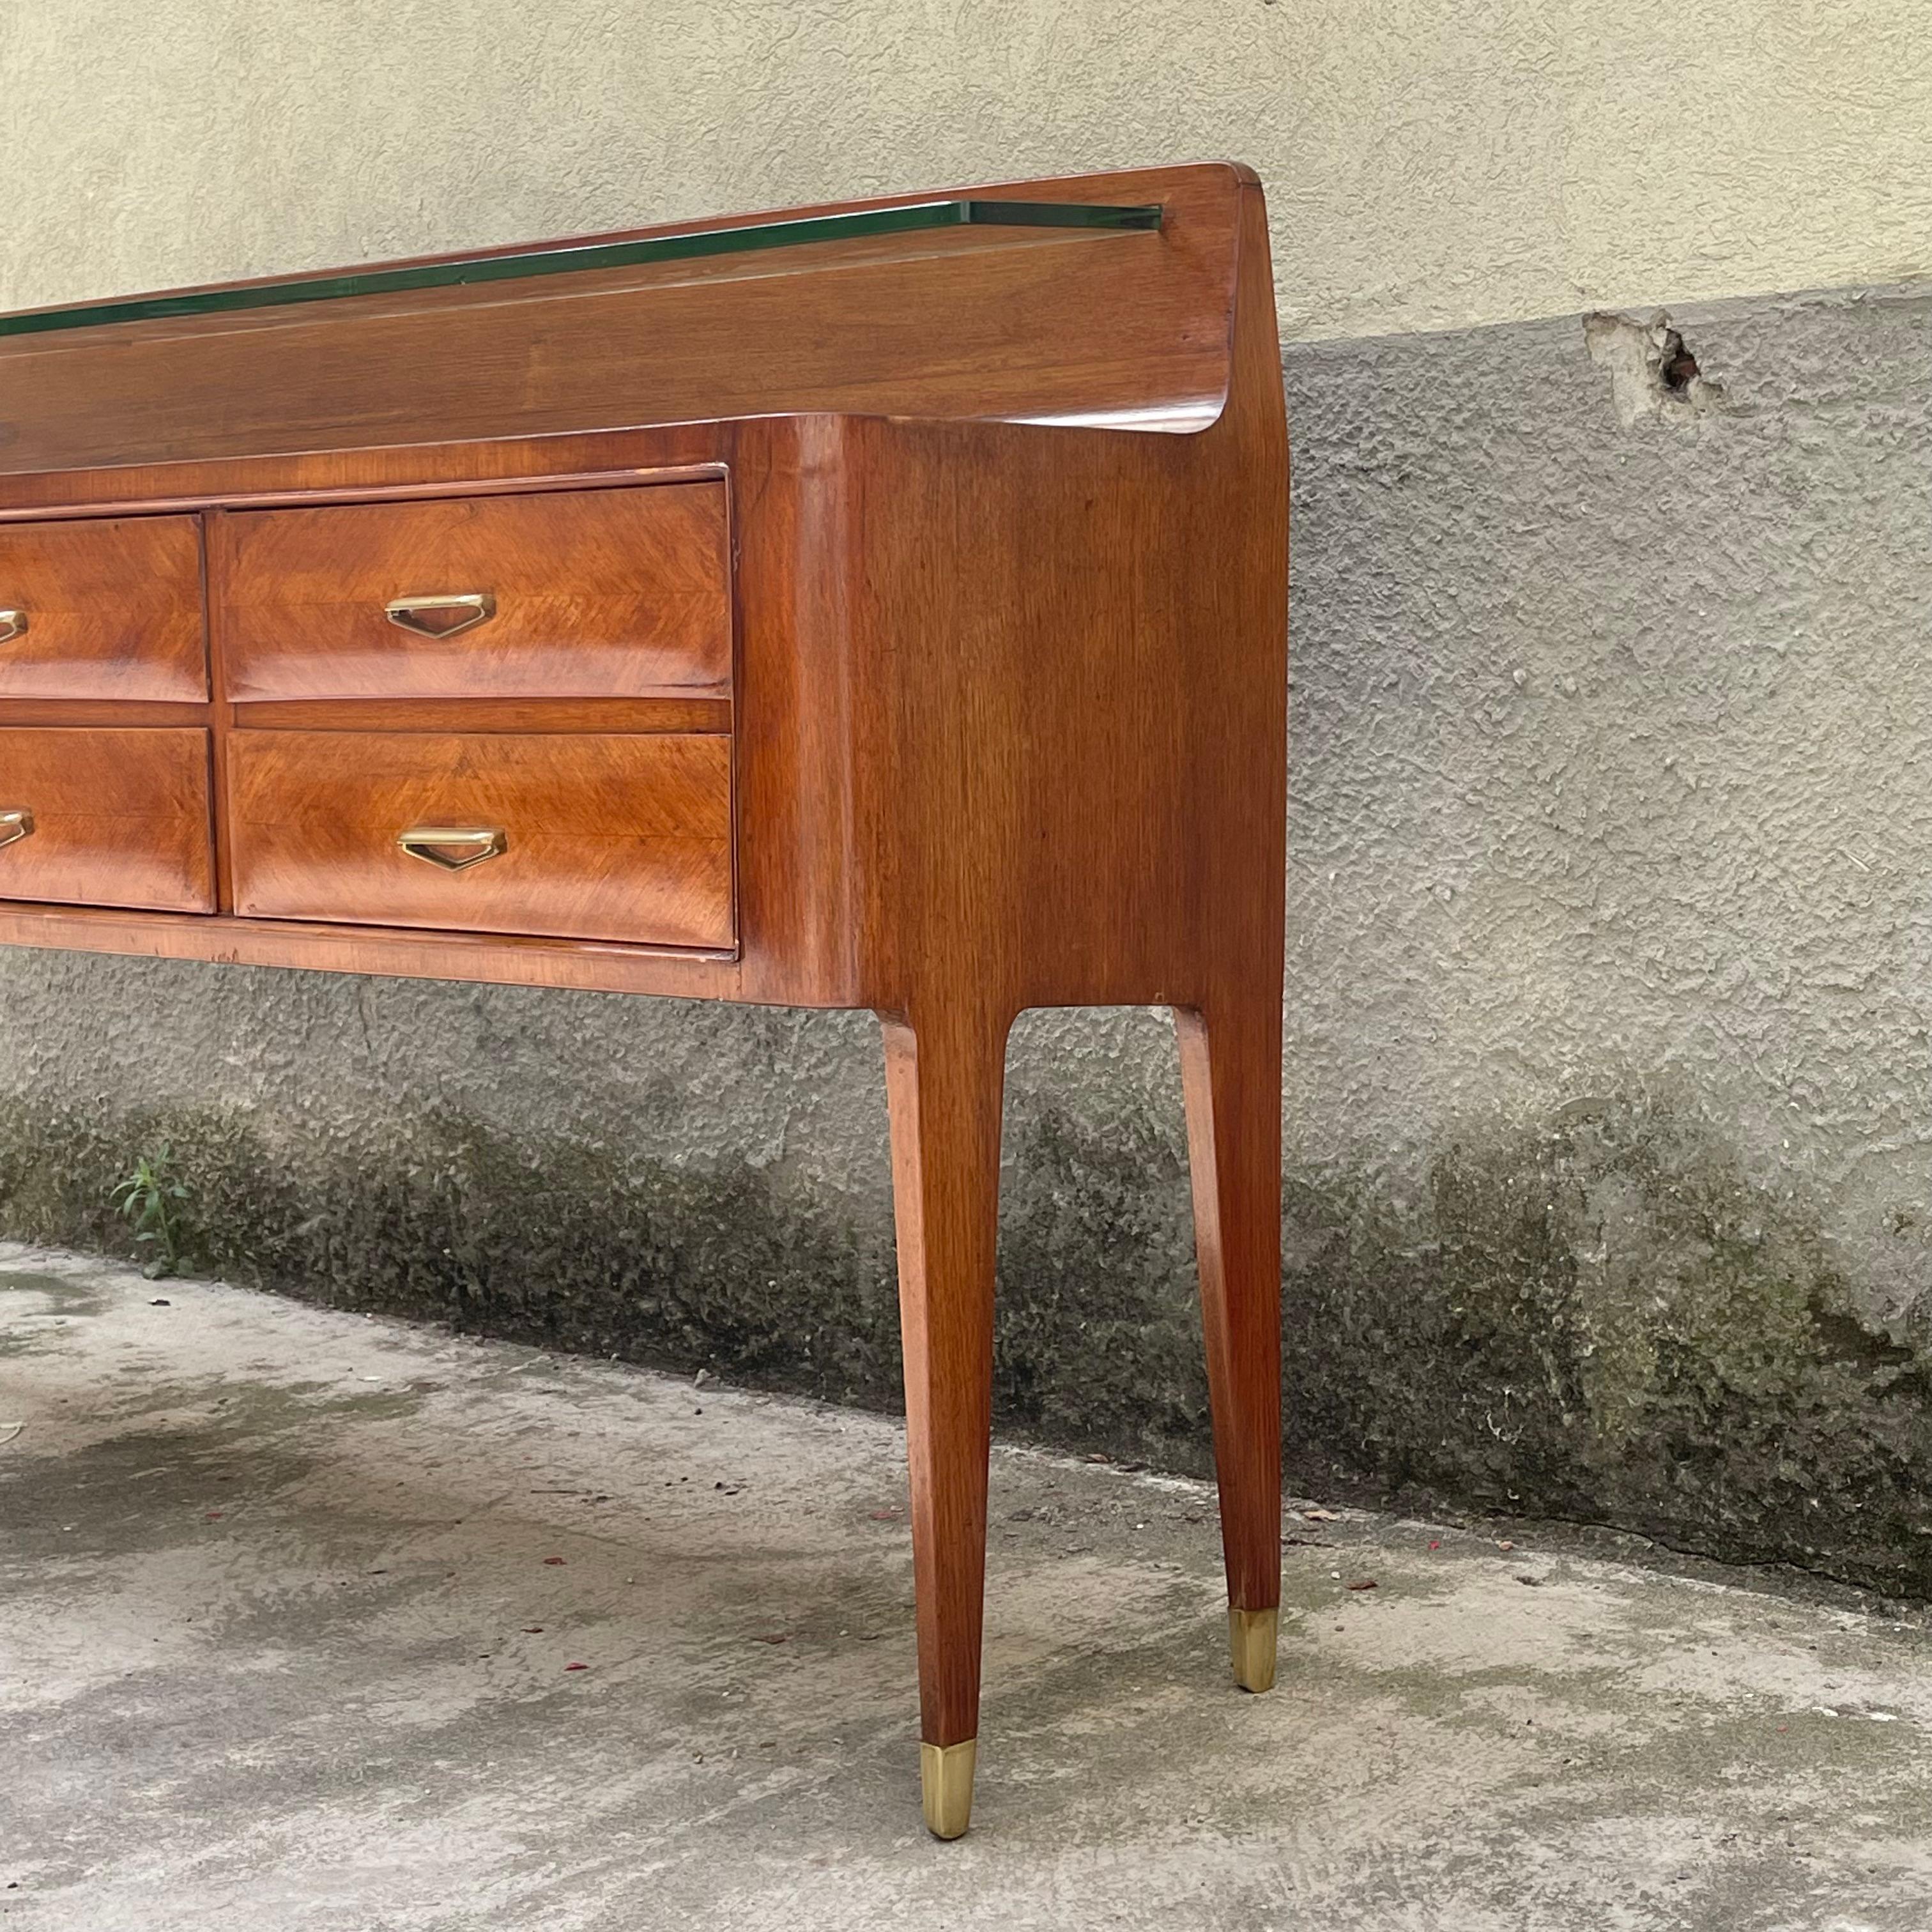 Sideboard in the Style of Ico Parisi - Brass and Glass Details - Italy 1950s For Sale 2